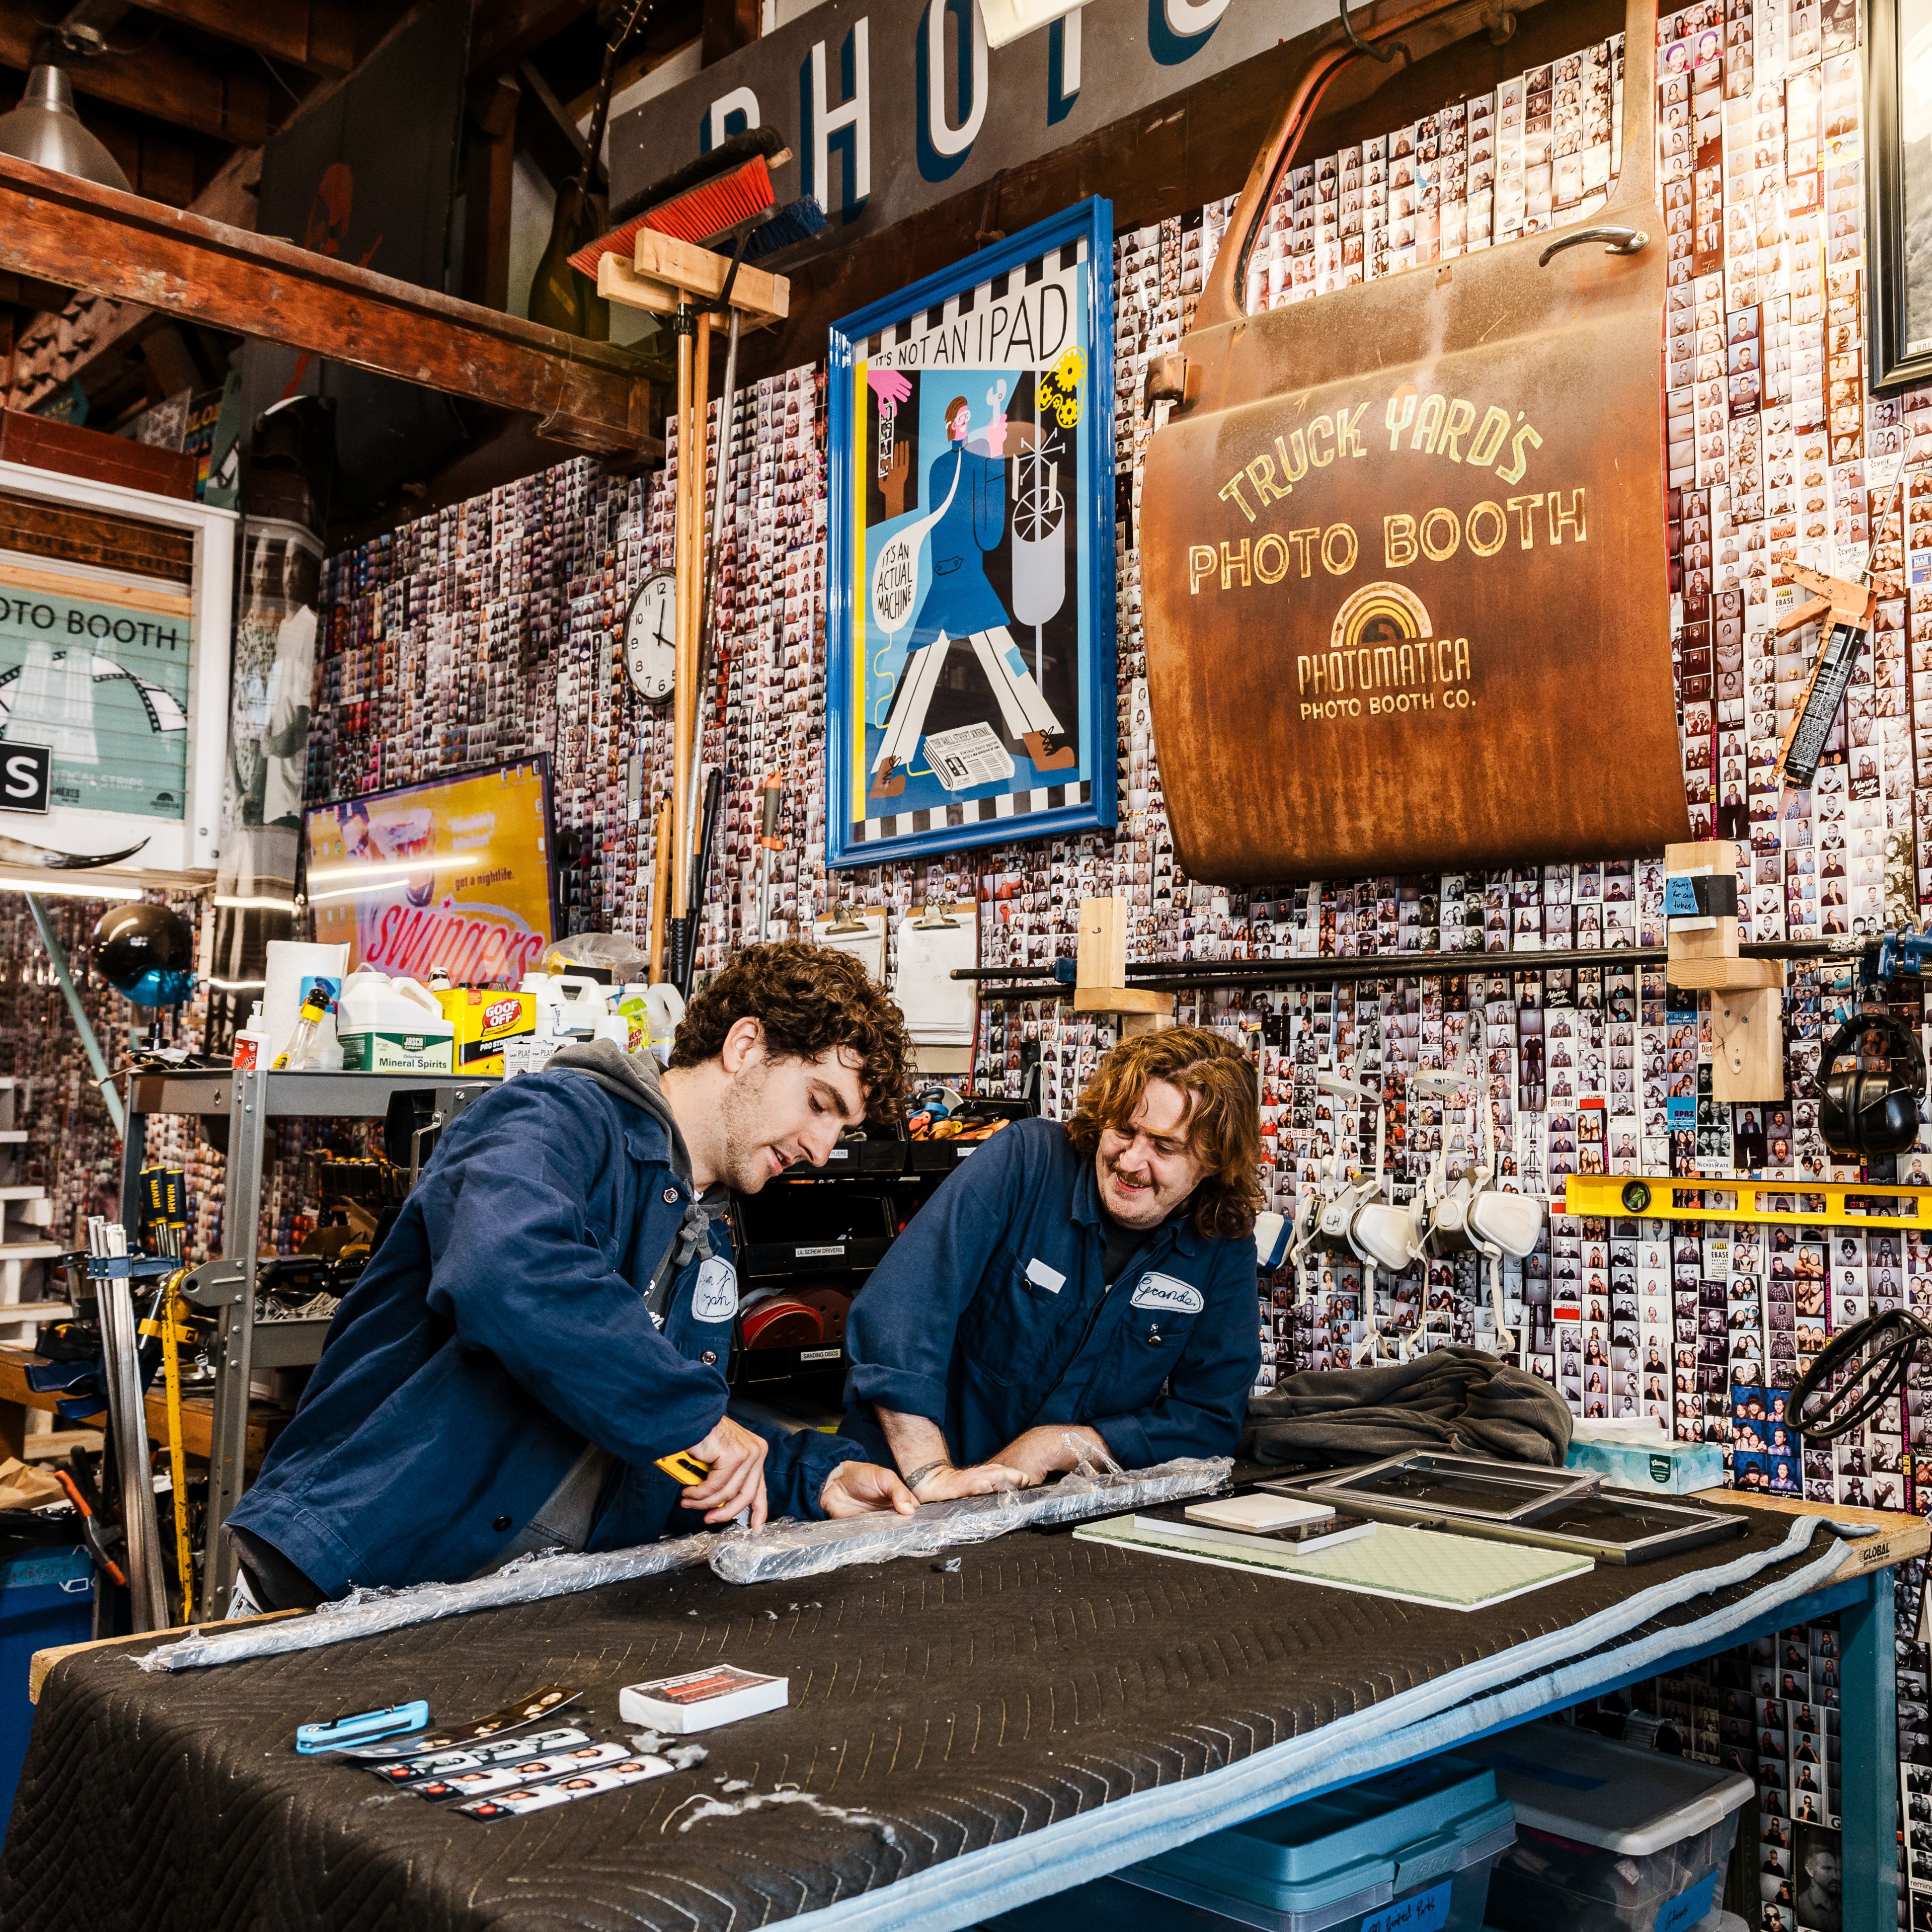 Two people in blue jackets work together in a cluttered workshop. The walls are covered with photo strips, various tools, and colorful posters.